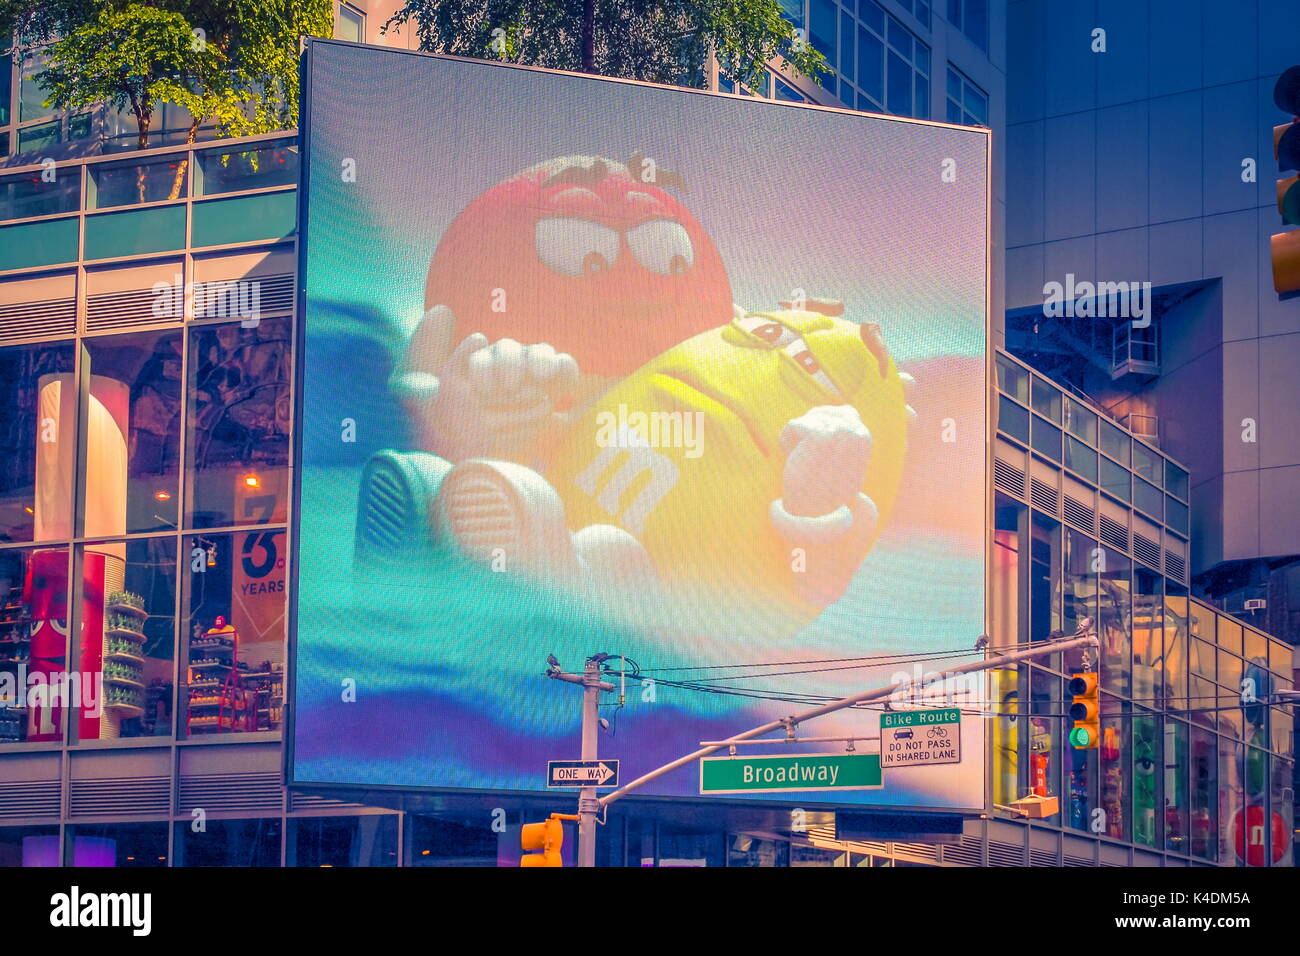 New York, USA - September 27, 2016: Giant billboard showing  M and M Candy on the streets of Broadway. Stock Photo